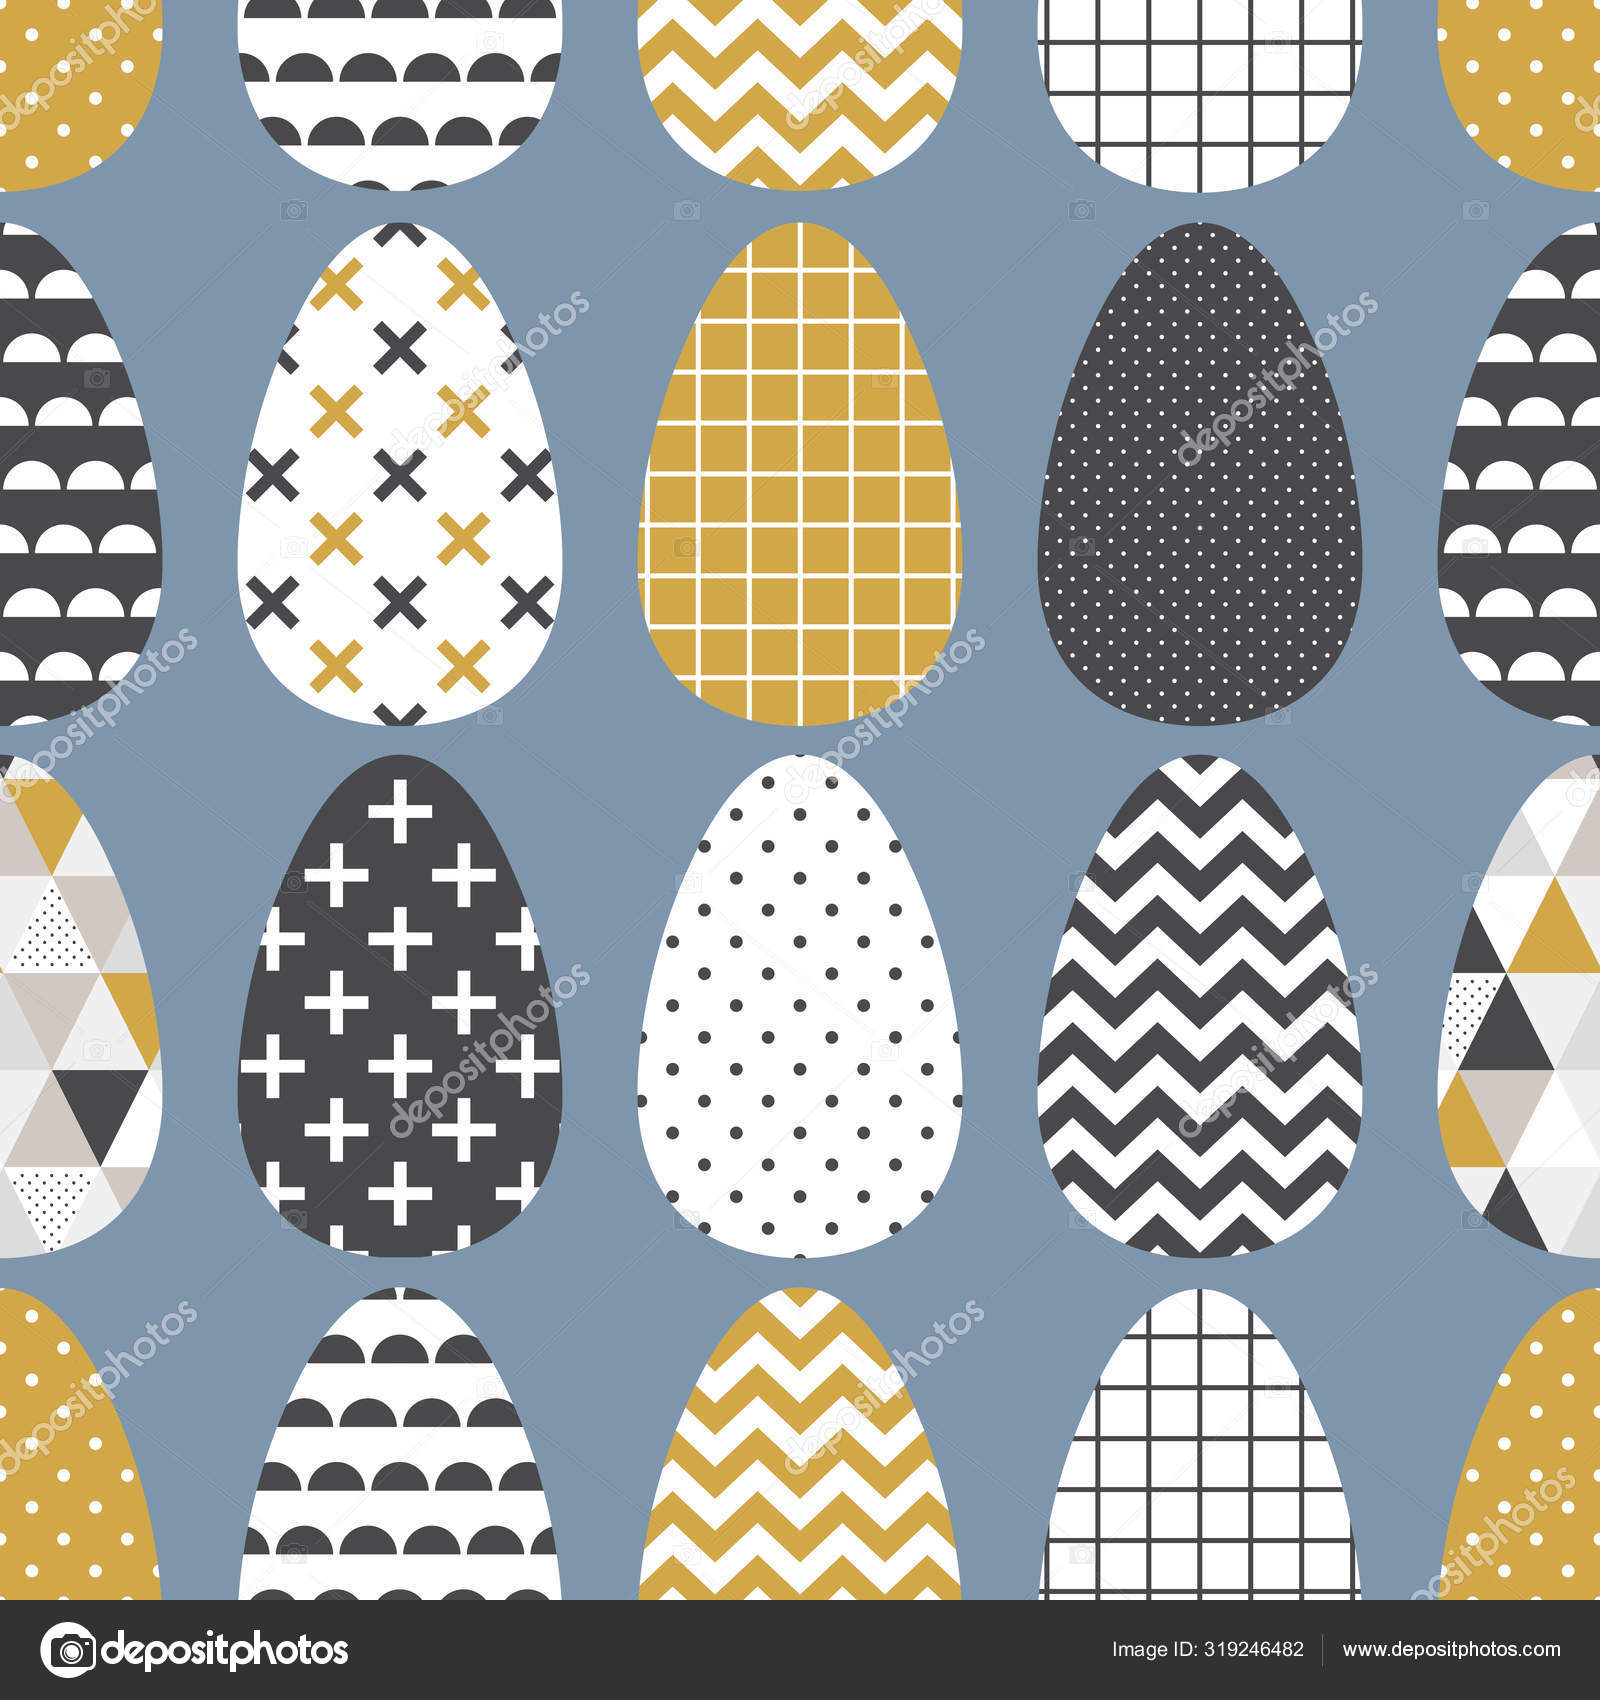 Stunning cute patterns black and white Cute Scandinavian Easter Eggs Seamless Pattern With Geometric Tribal Ornament In Black White And Gold Colors Of Ethnic Patterns Vector Image By C Ishkrabal Stock 319246482